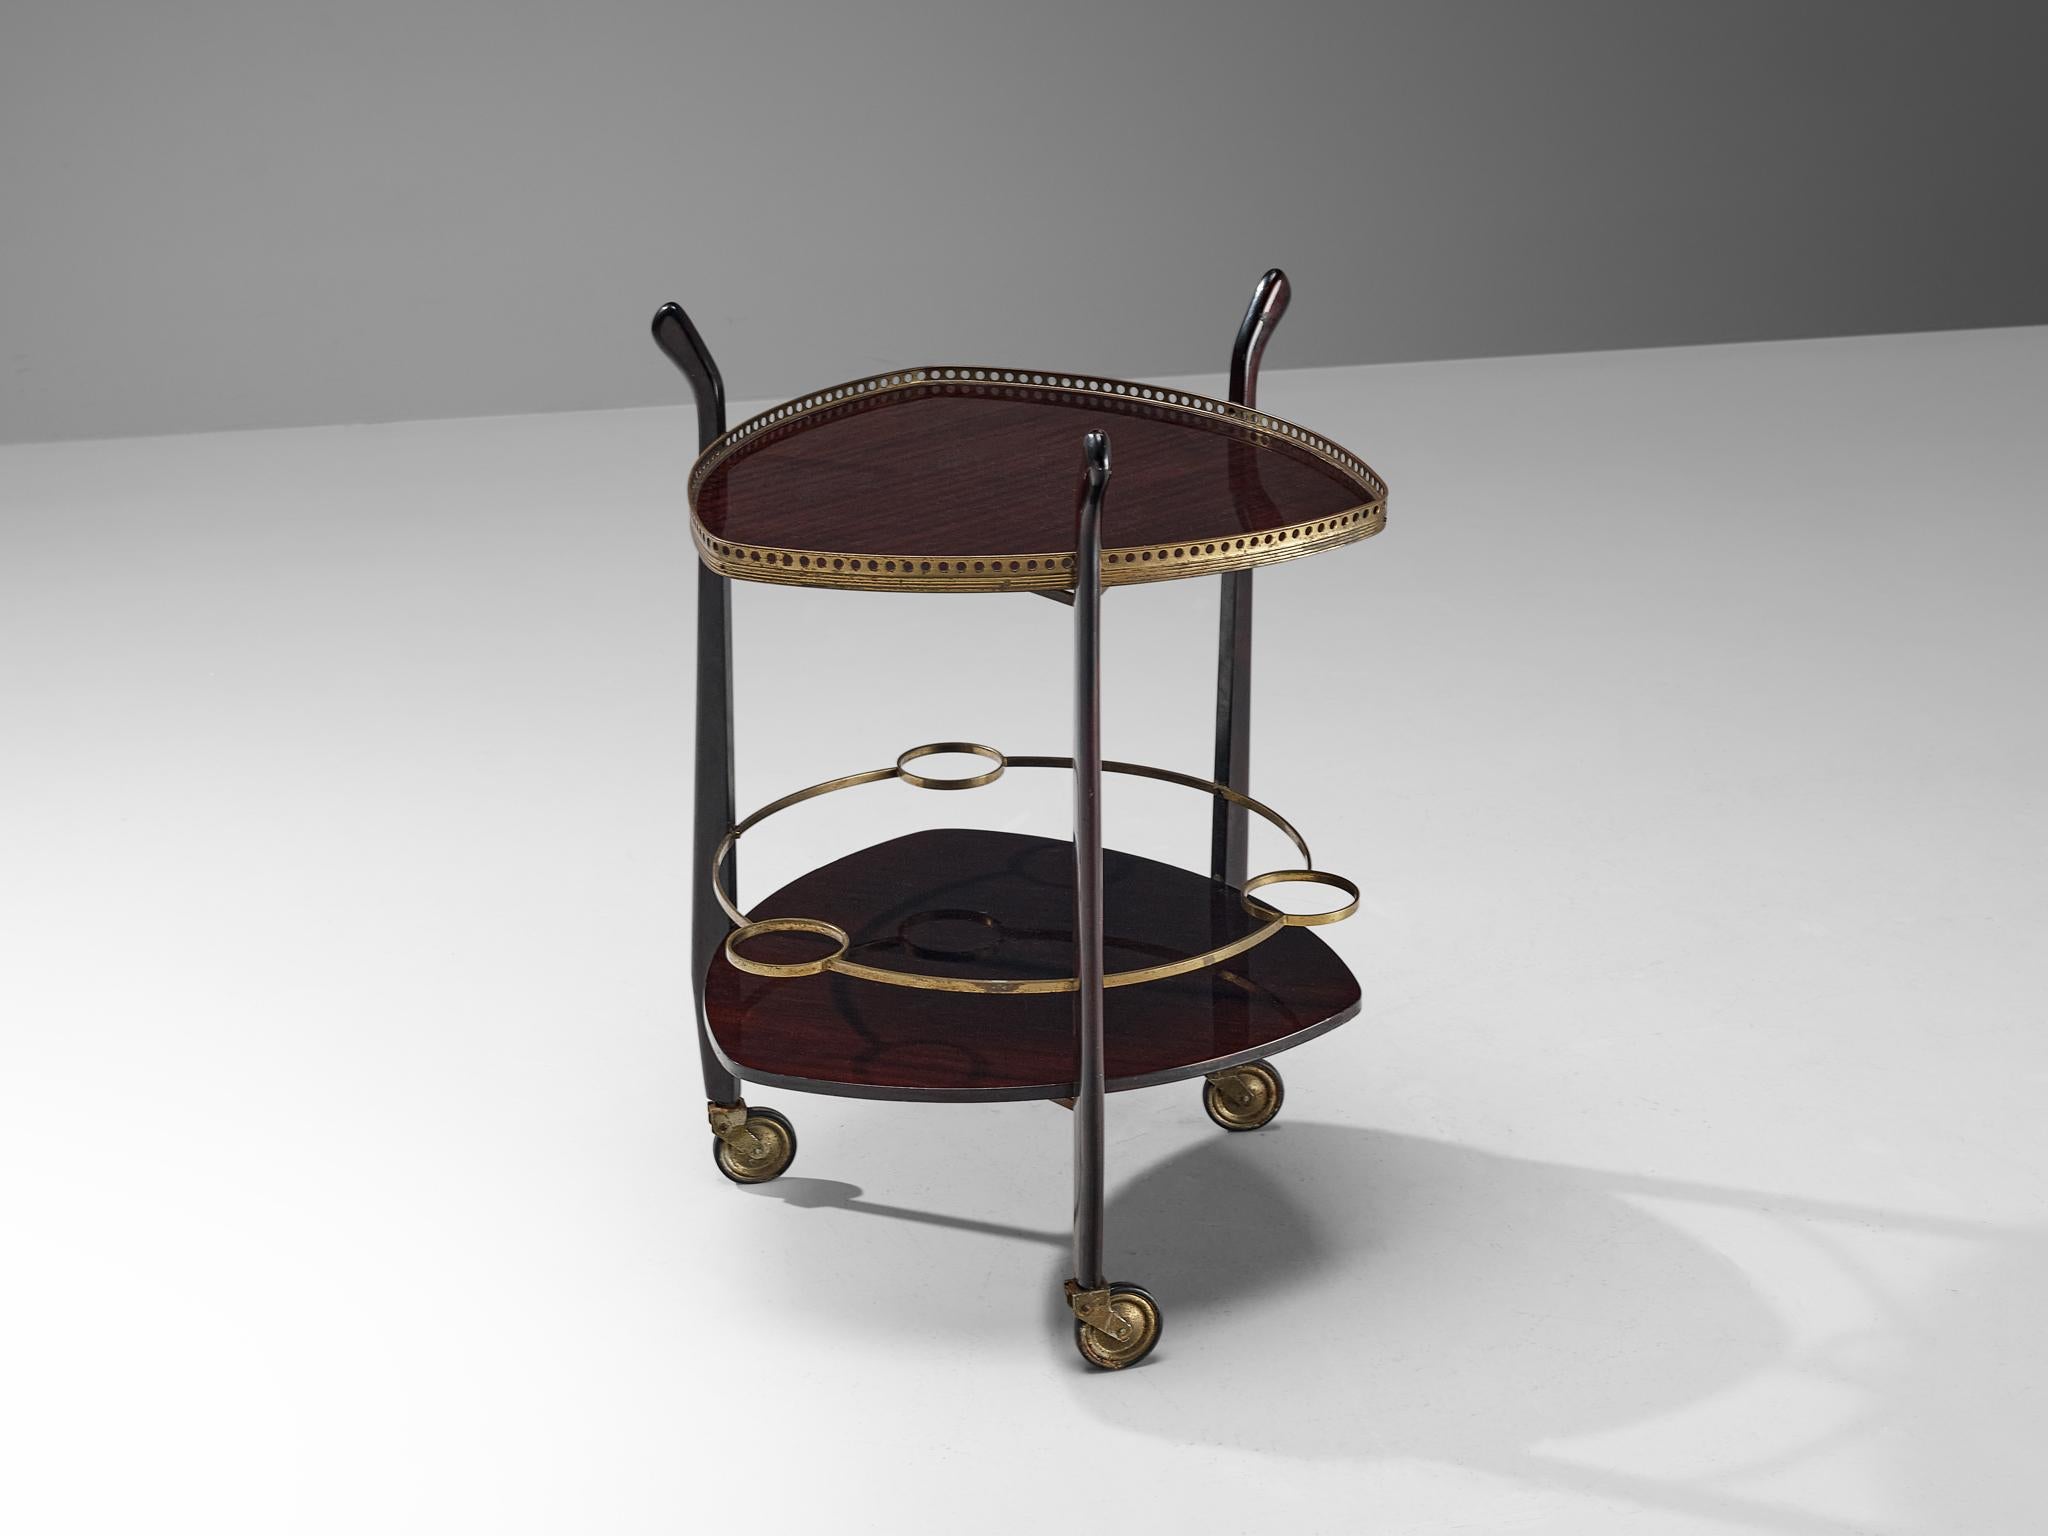 Serving trolley or bar cart, stained mahogany, brass, France, 1950s

This delicate bar cart has an open framework executed in the finest materials. The trolley contains two serving plates in stained mahogany with a gloss finish and three bottle